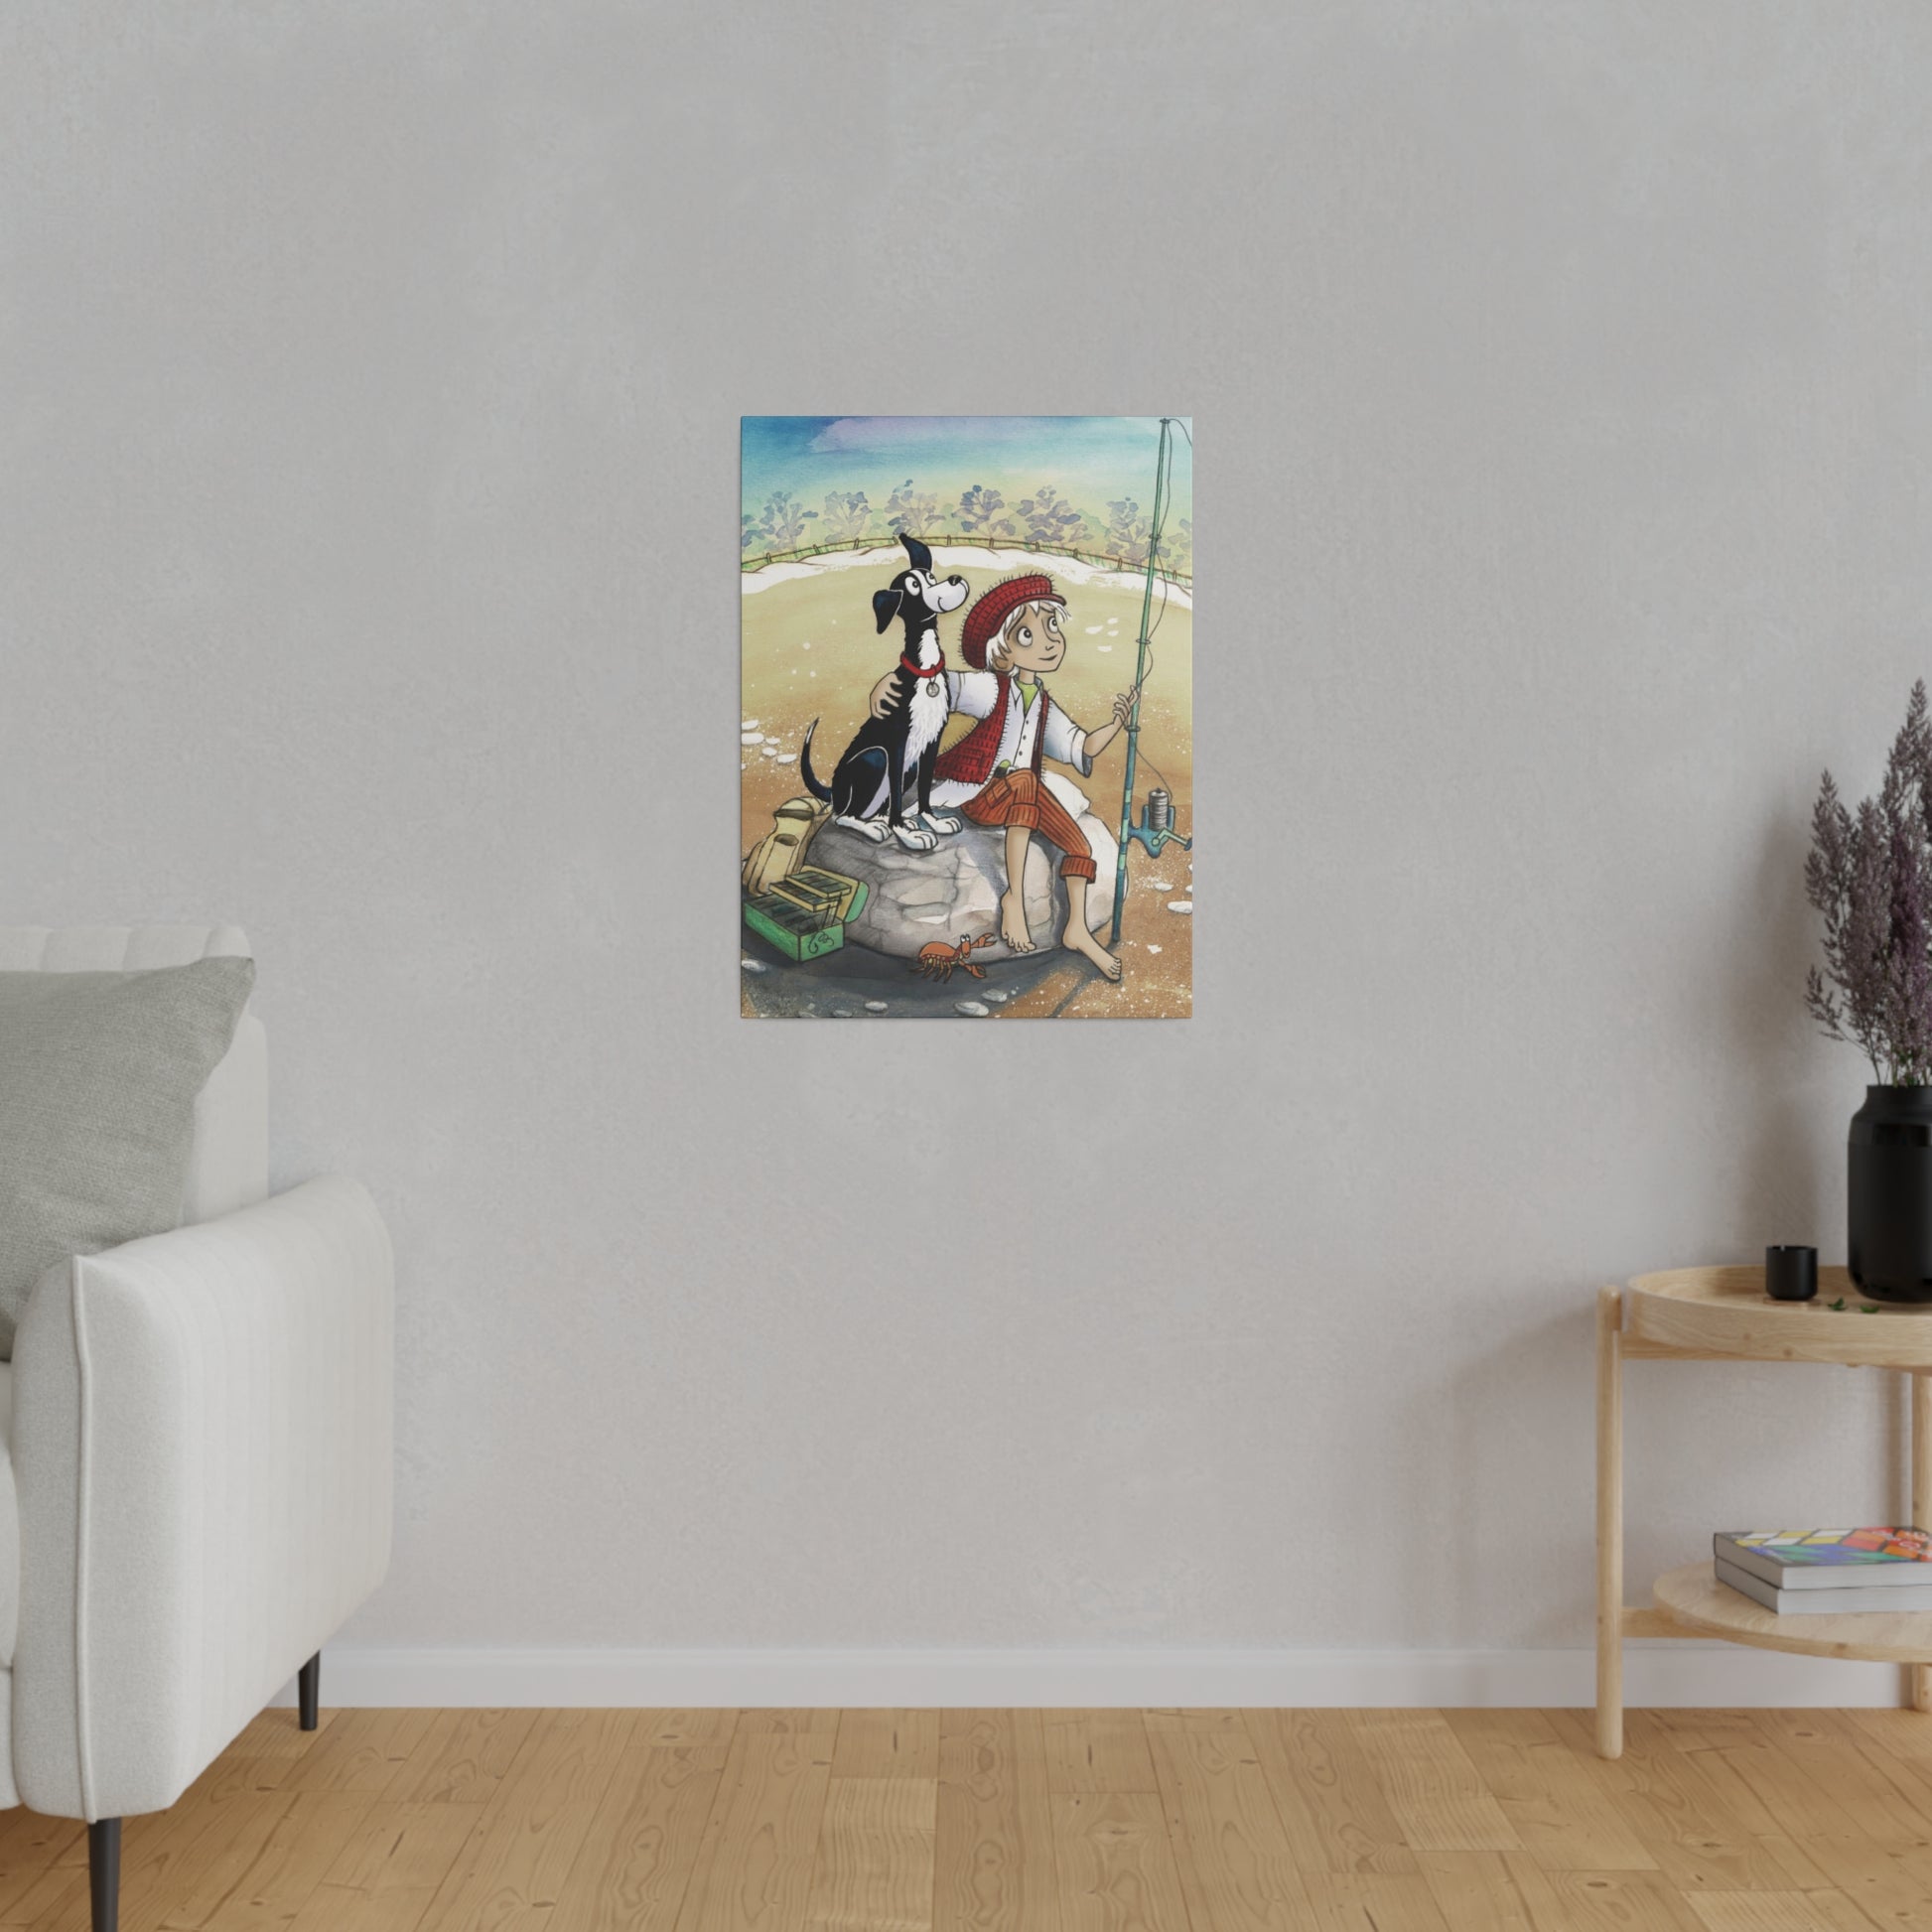 A 18" x 24" 'Dogs Pure Love Fishing' canvas hangs on a mauve colored living room wall.